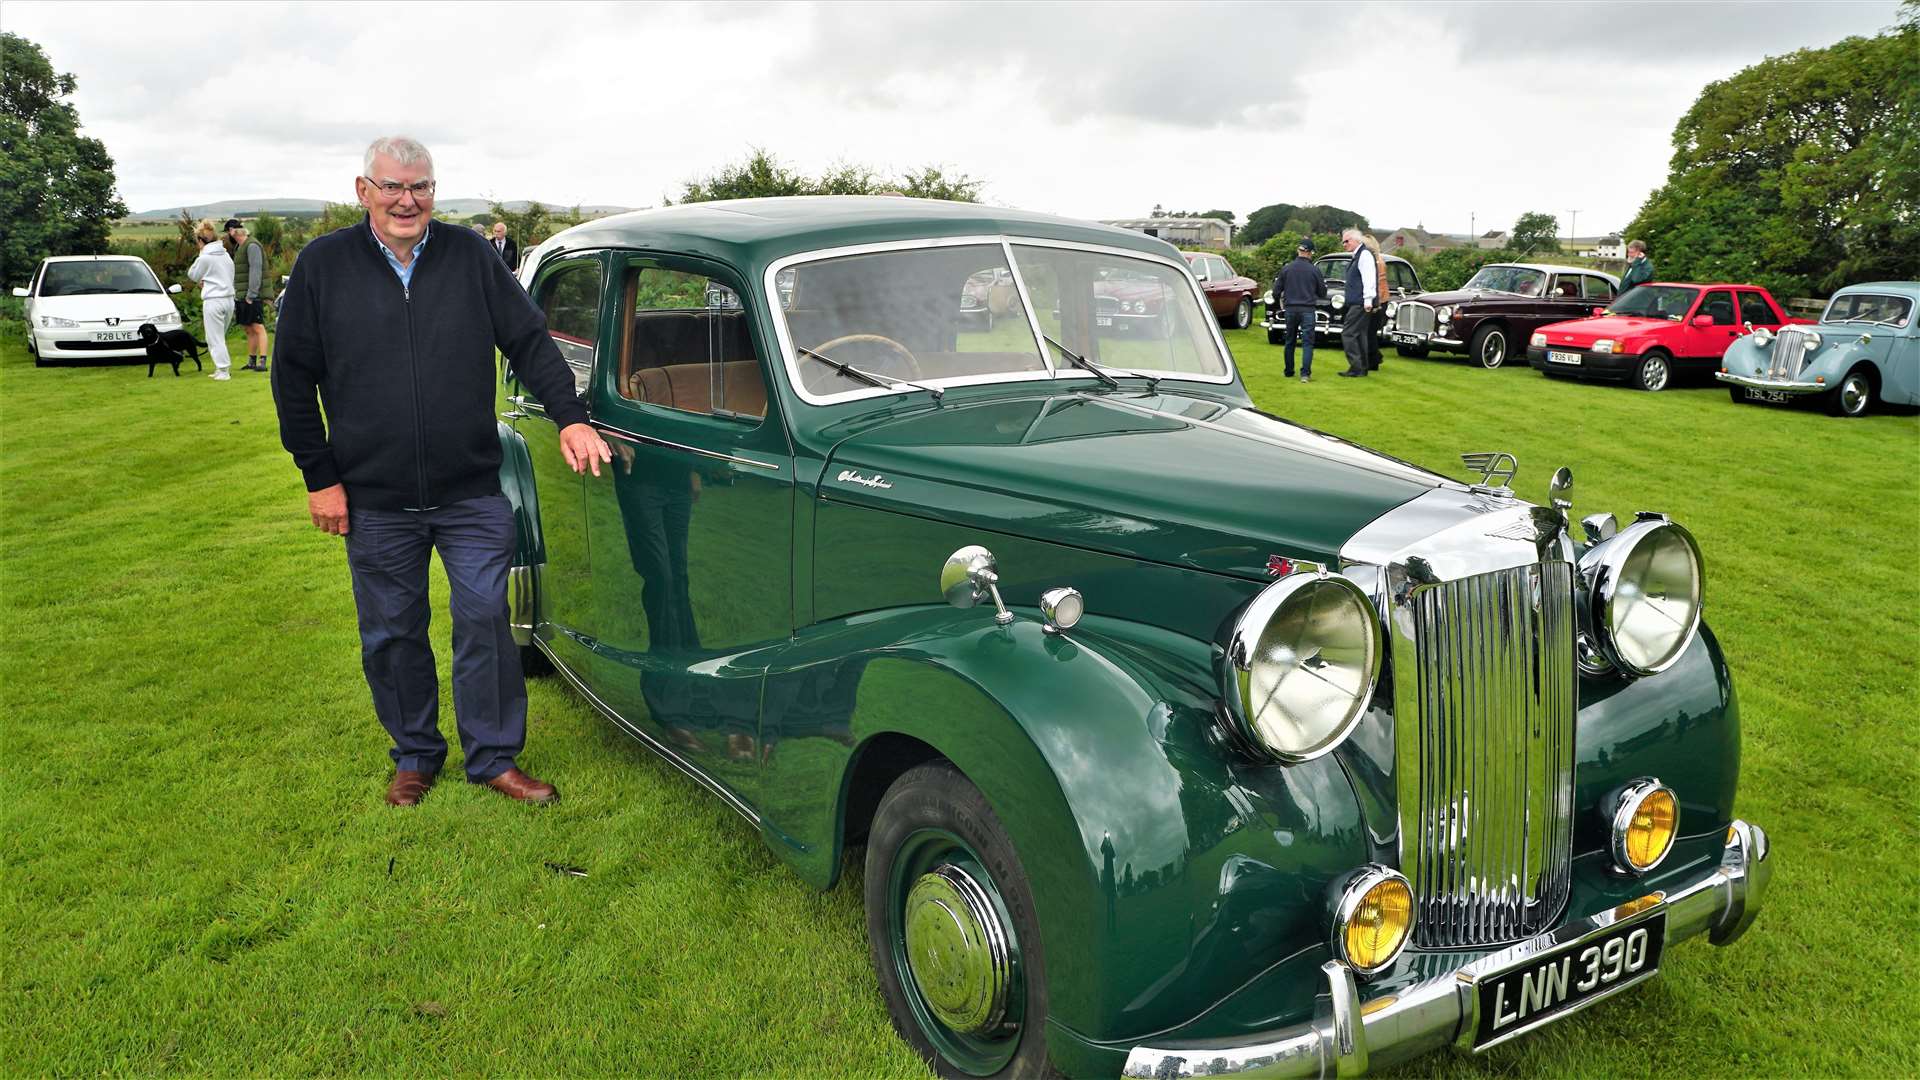 Iain Sutherland from Inverness paid tribute to his late cousin Edward Sutherland and drove his 1950 Austin Sheerline. Picture: DGS